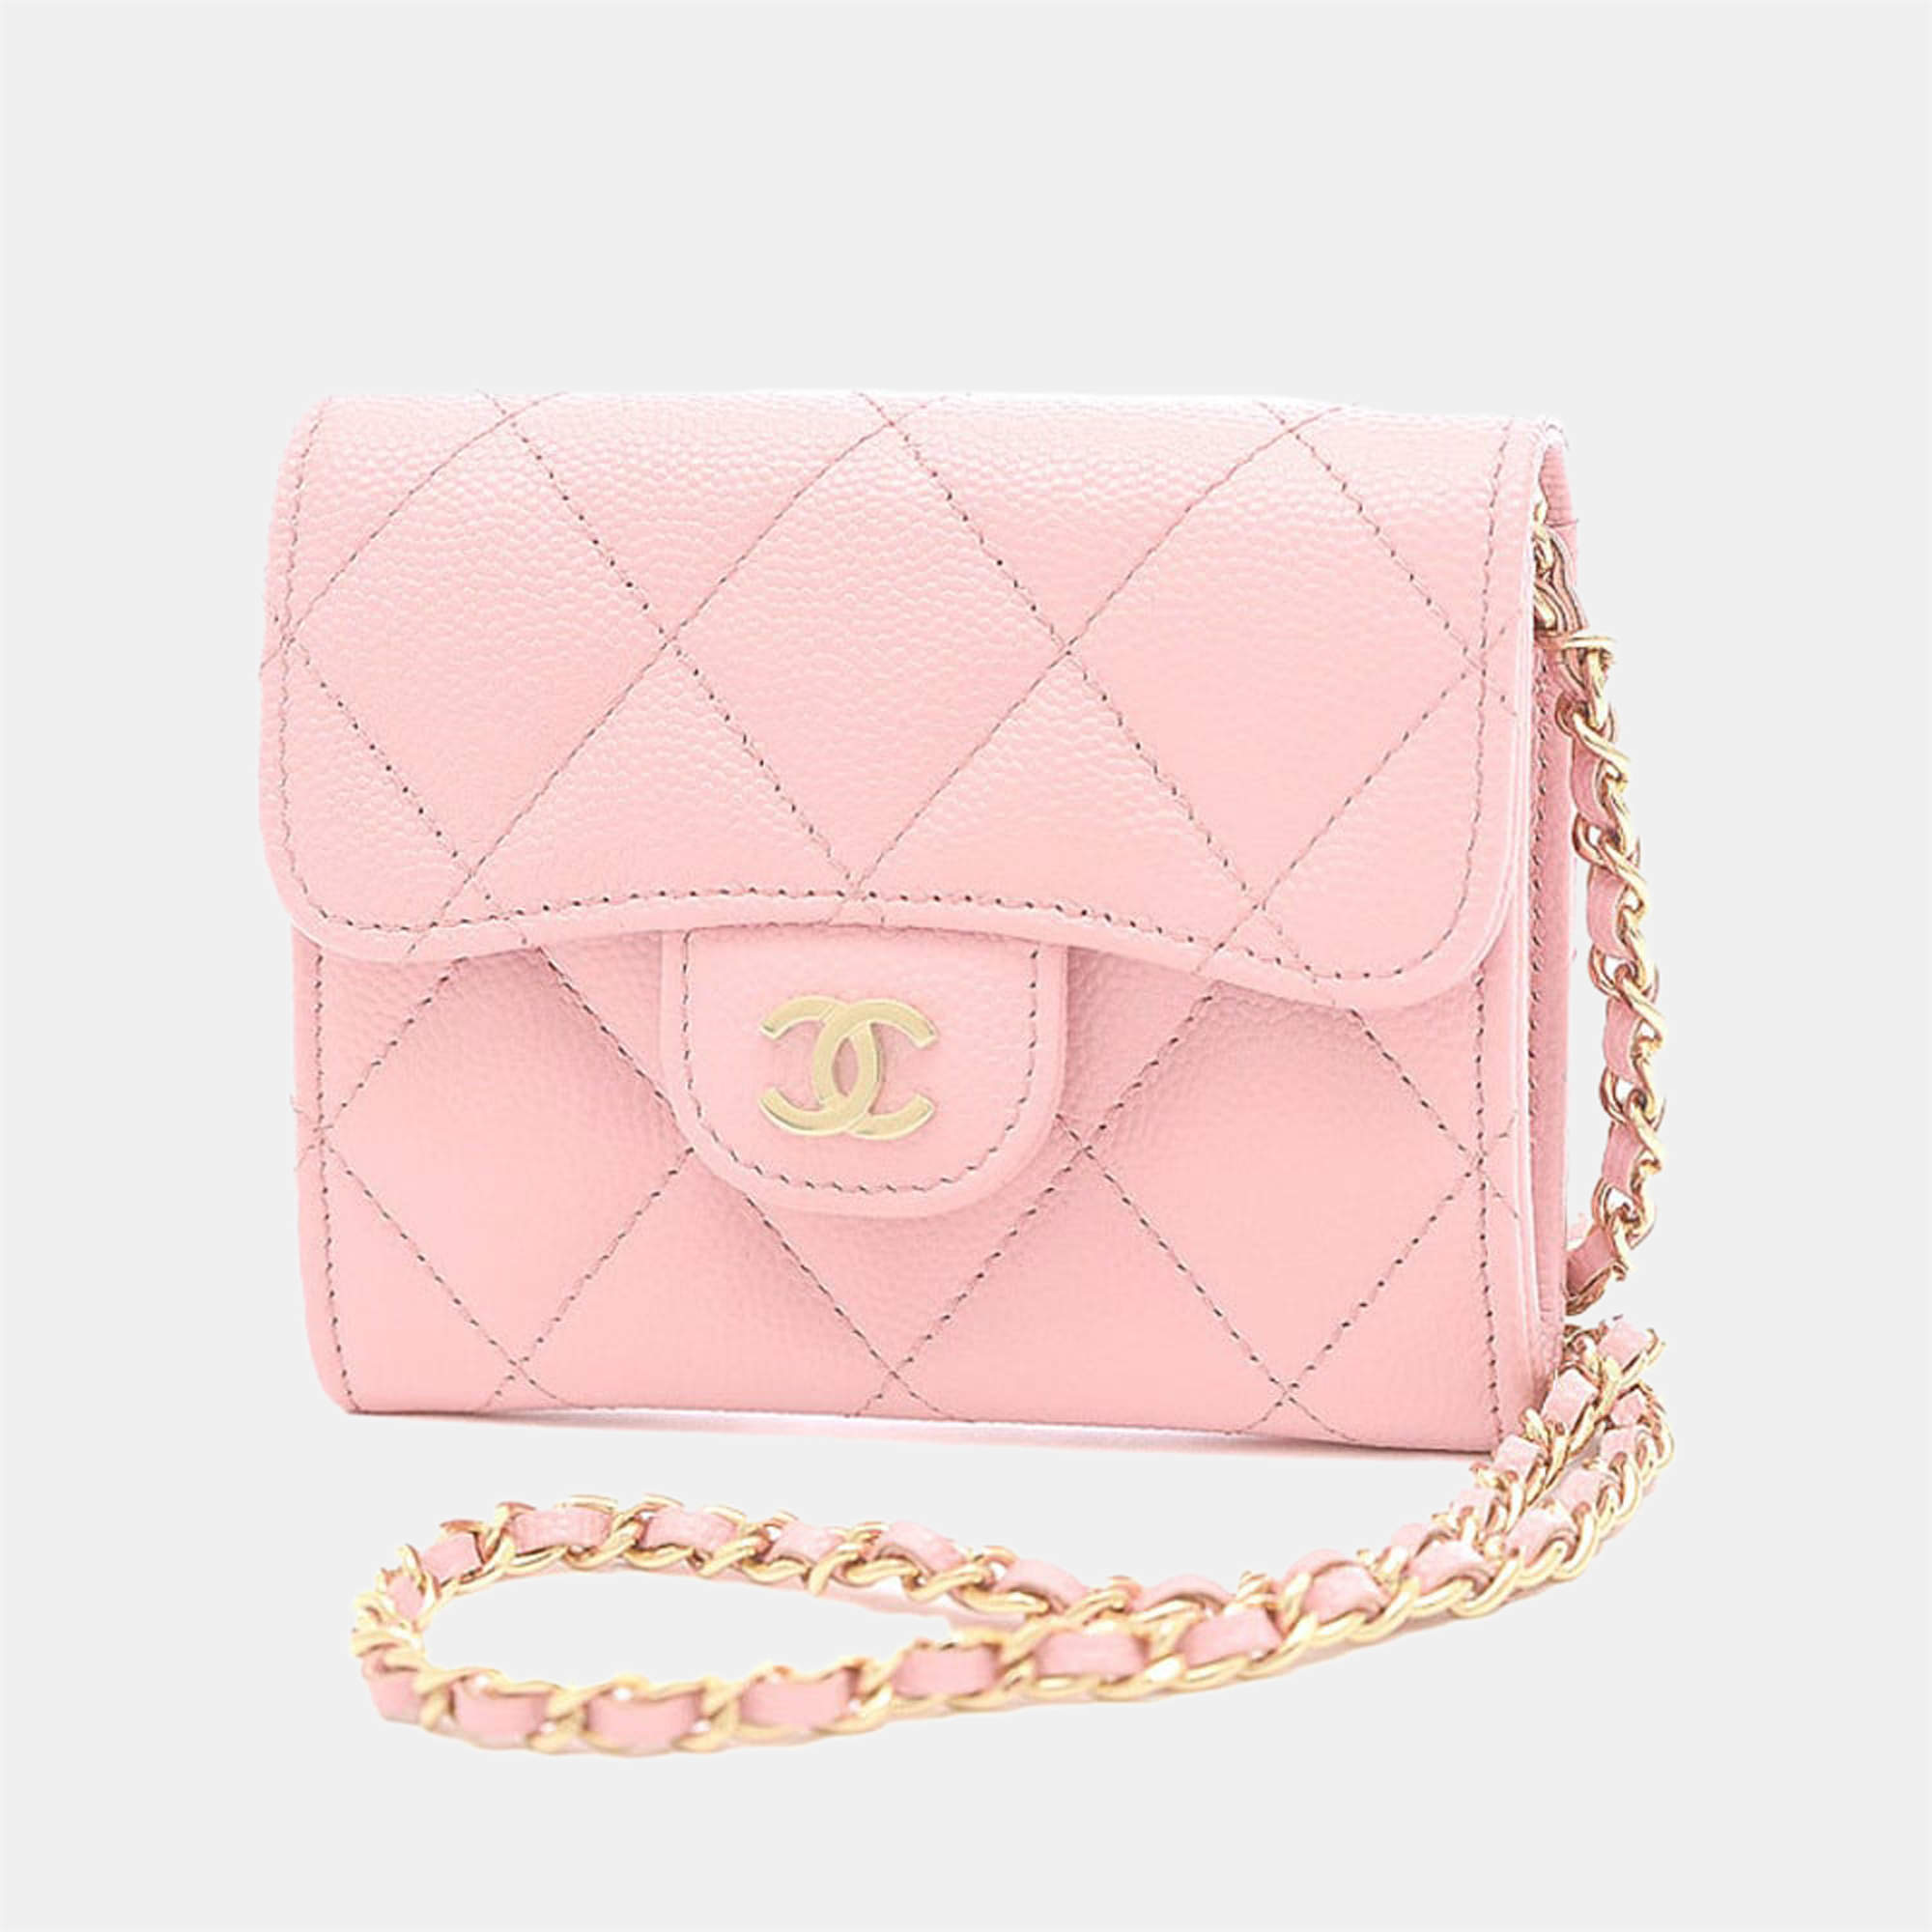 CHANEL Matelasse small wallet Pink AP3055 Caviar Leather GALLERY RARE  Global Online Store